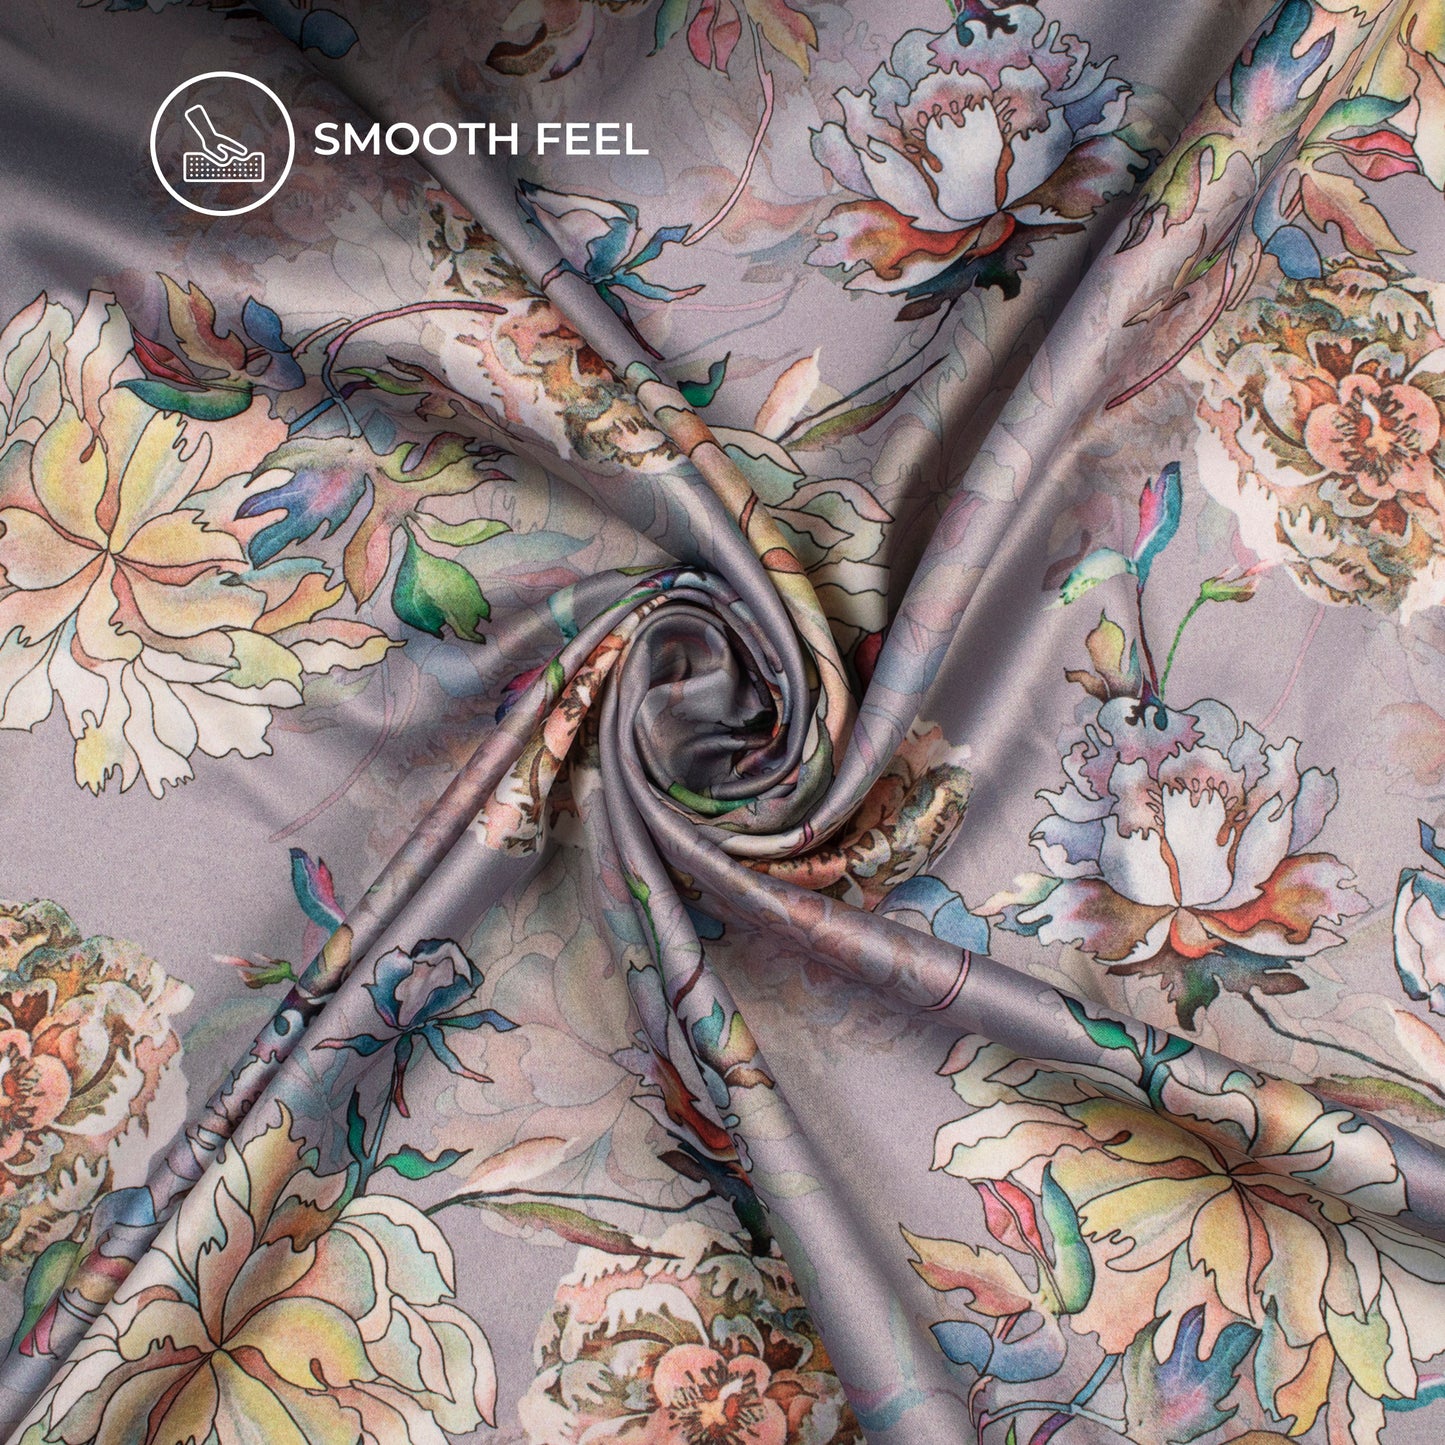 Fanciable Floral Digital Print Charmeuse Satin Fabric (Width 58 Inches)